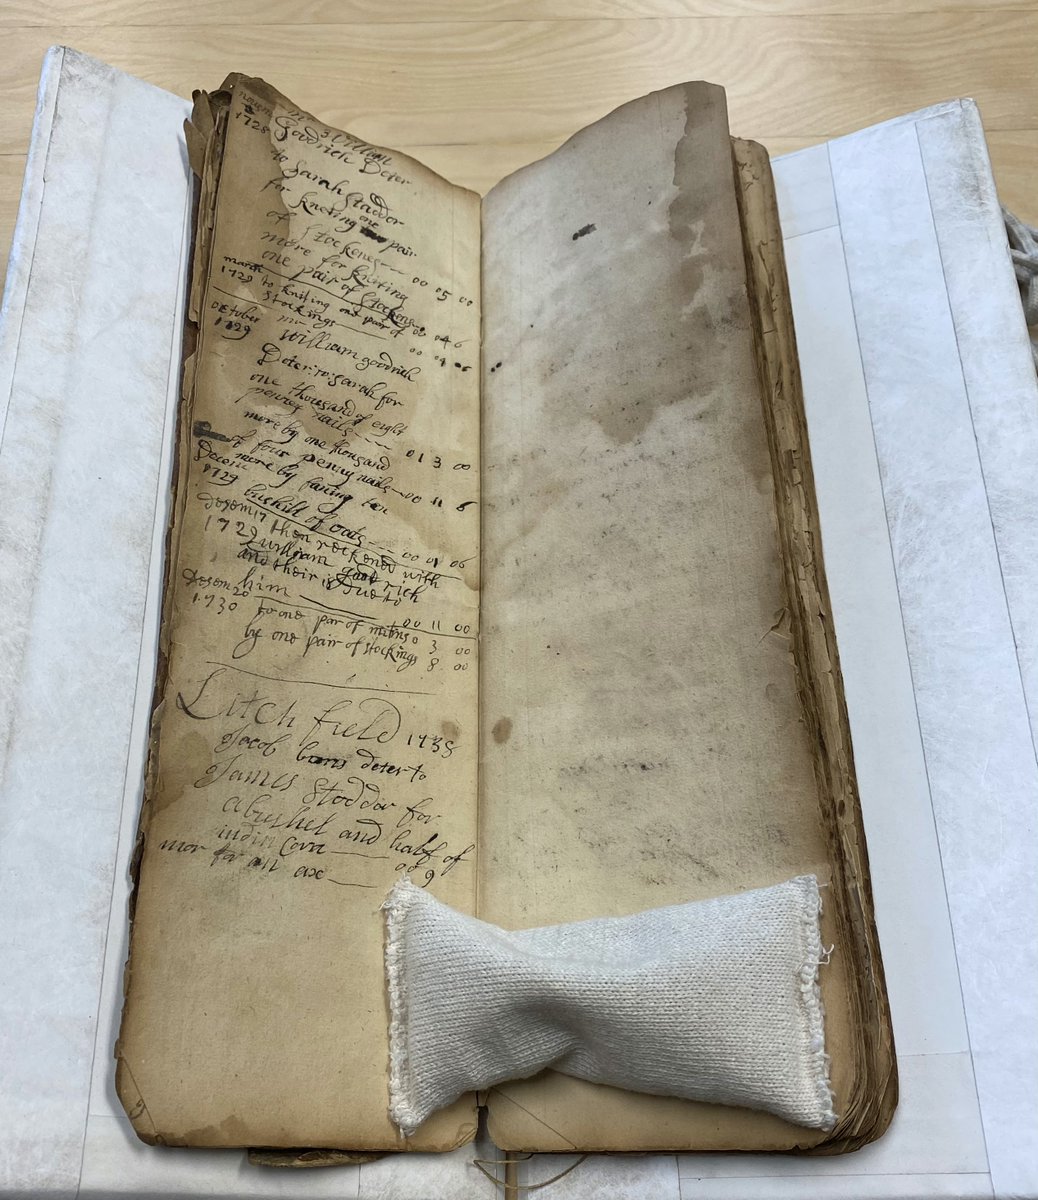 New (to me) archive, and yet another account book attributed to a dude (and catalogued under his name) and yet many of the accounts are by his wife (and some by her sons). #herbook